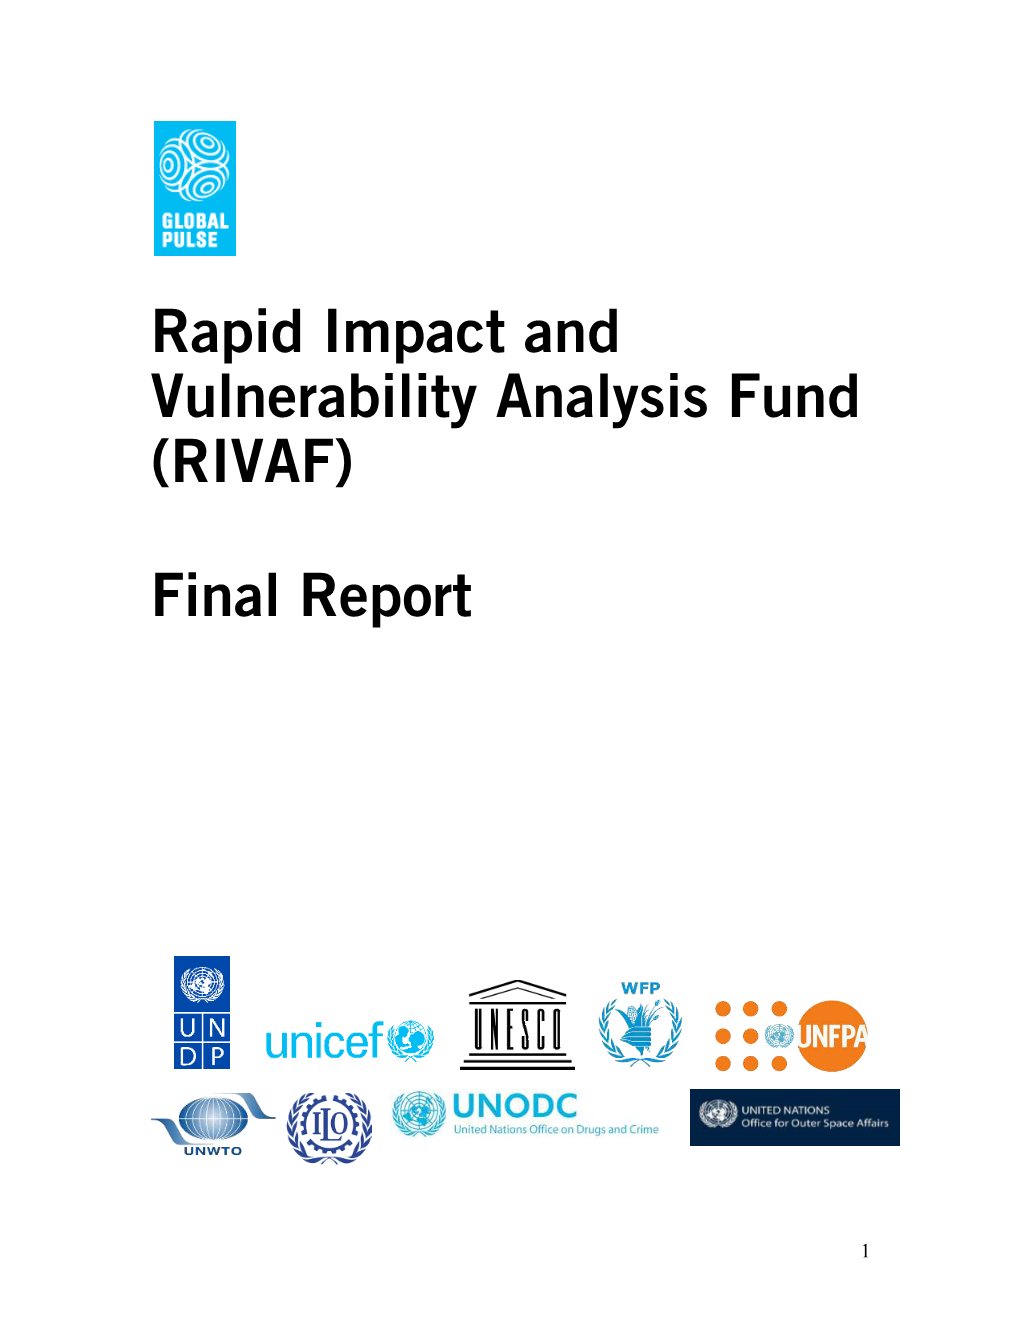 Rapid Impact and Vulnerability Analysis Fund (RIVAF)